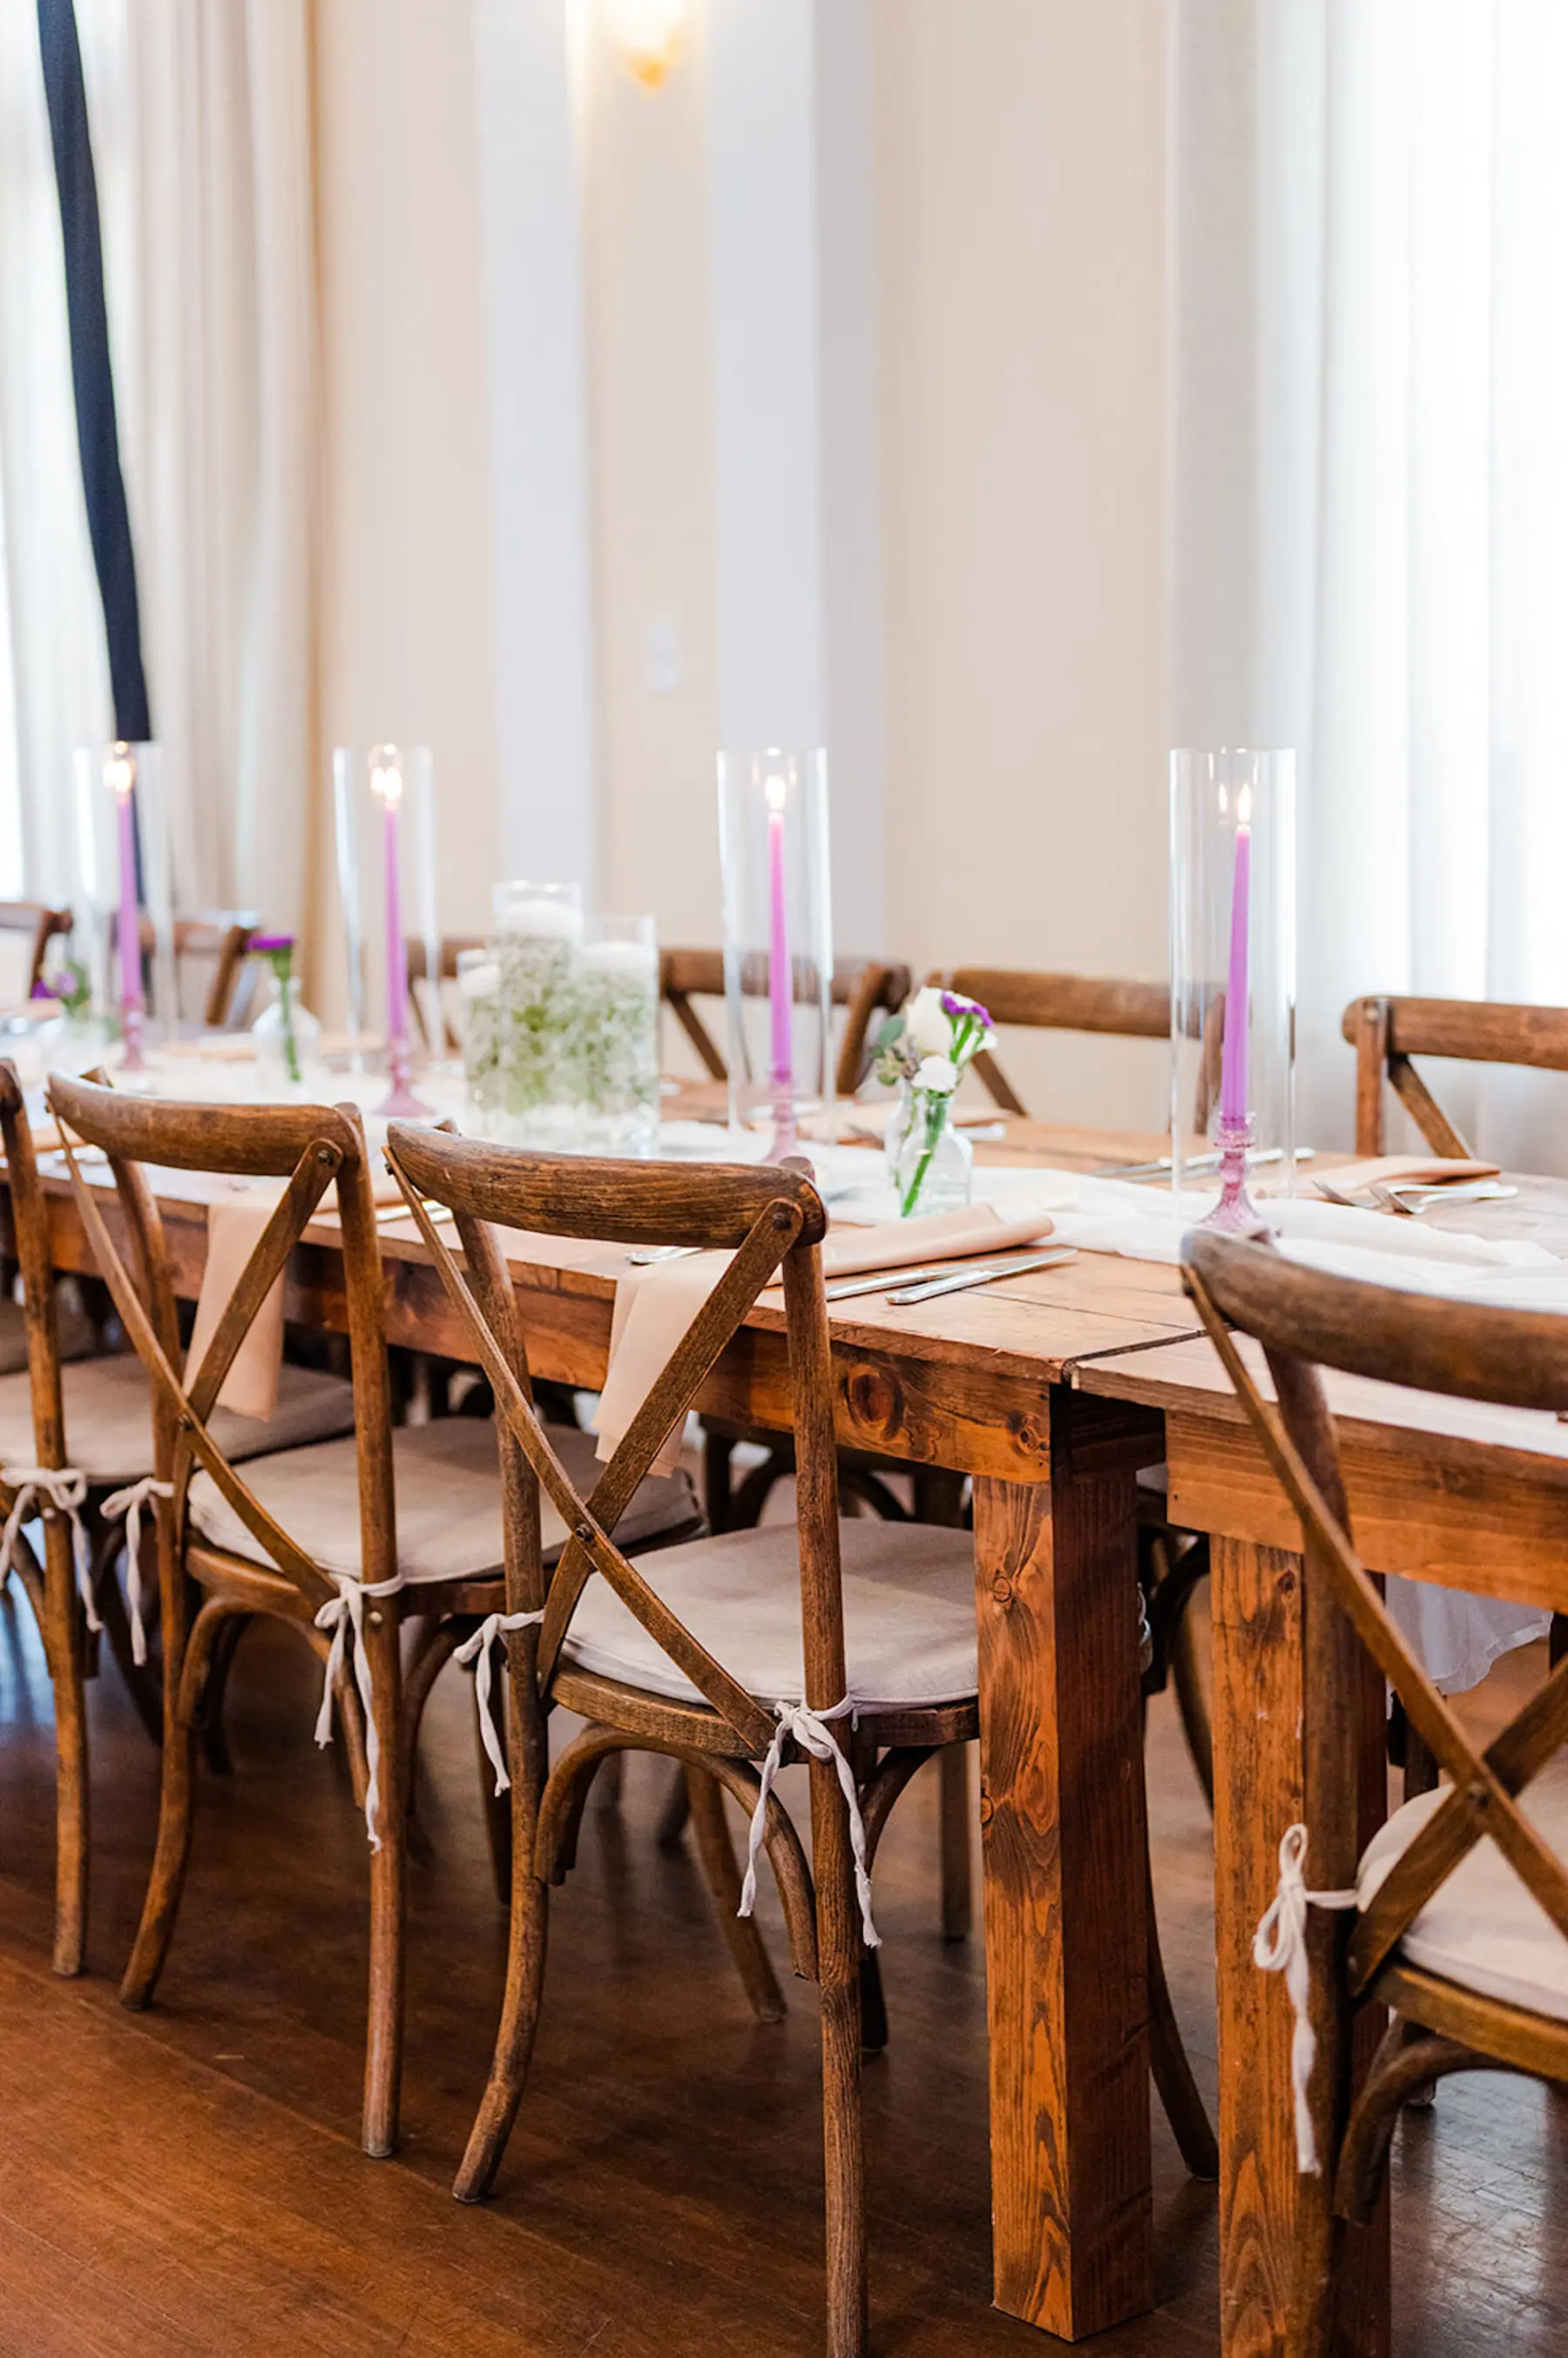 Elegant Spring Wedding Reception Decor Ideas with Wooden Crossback Chairs and Tables and Purple Candle Centerpieces